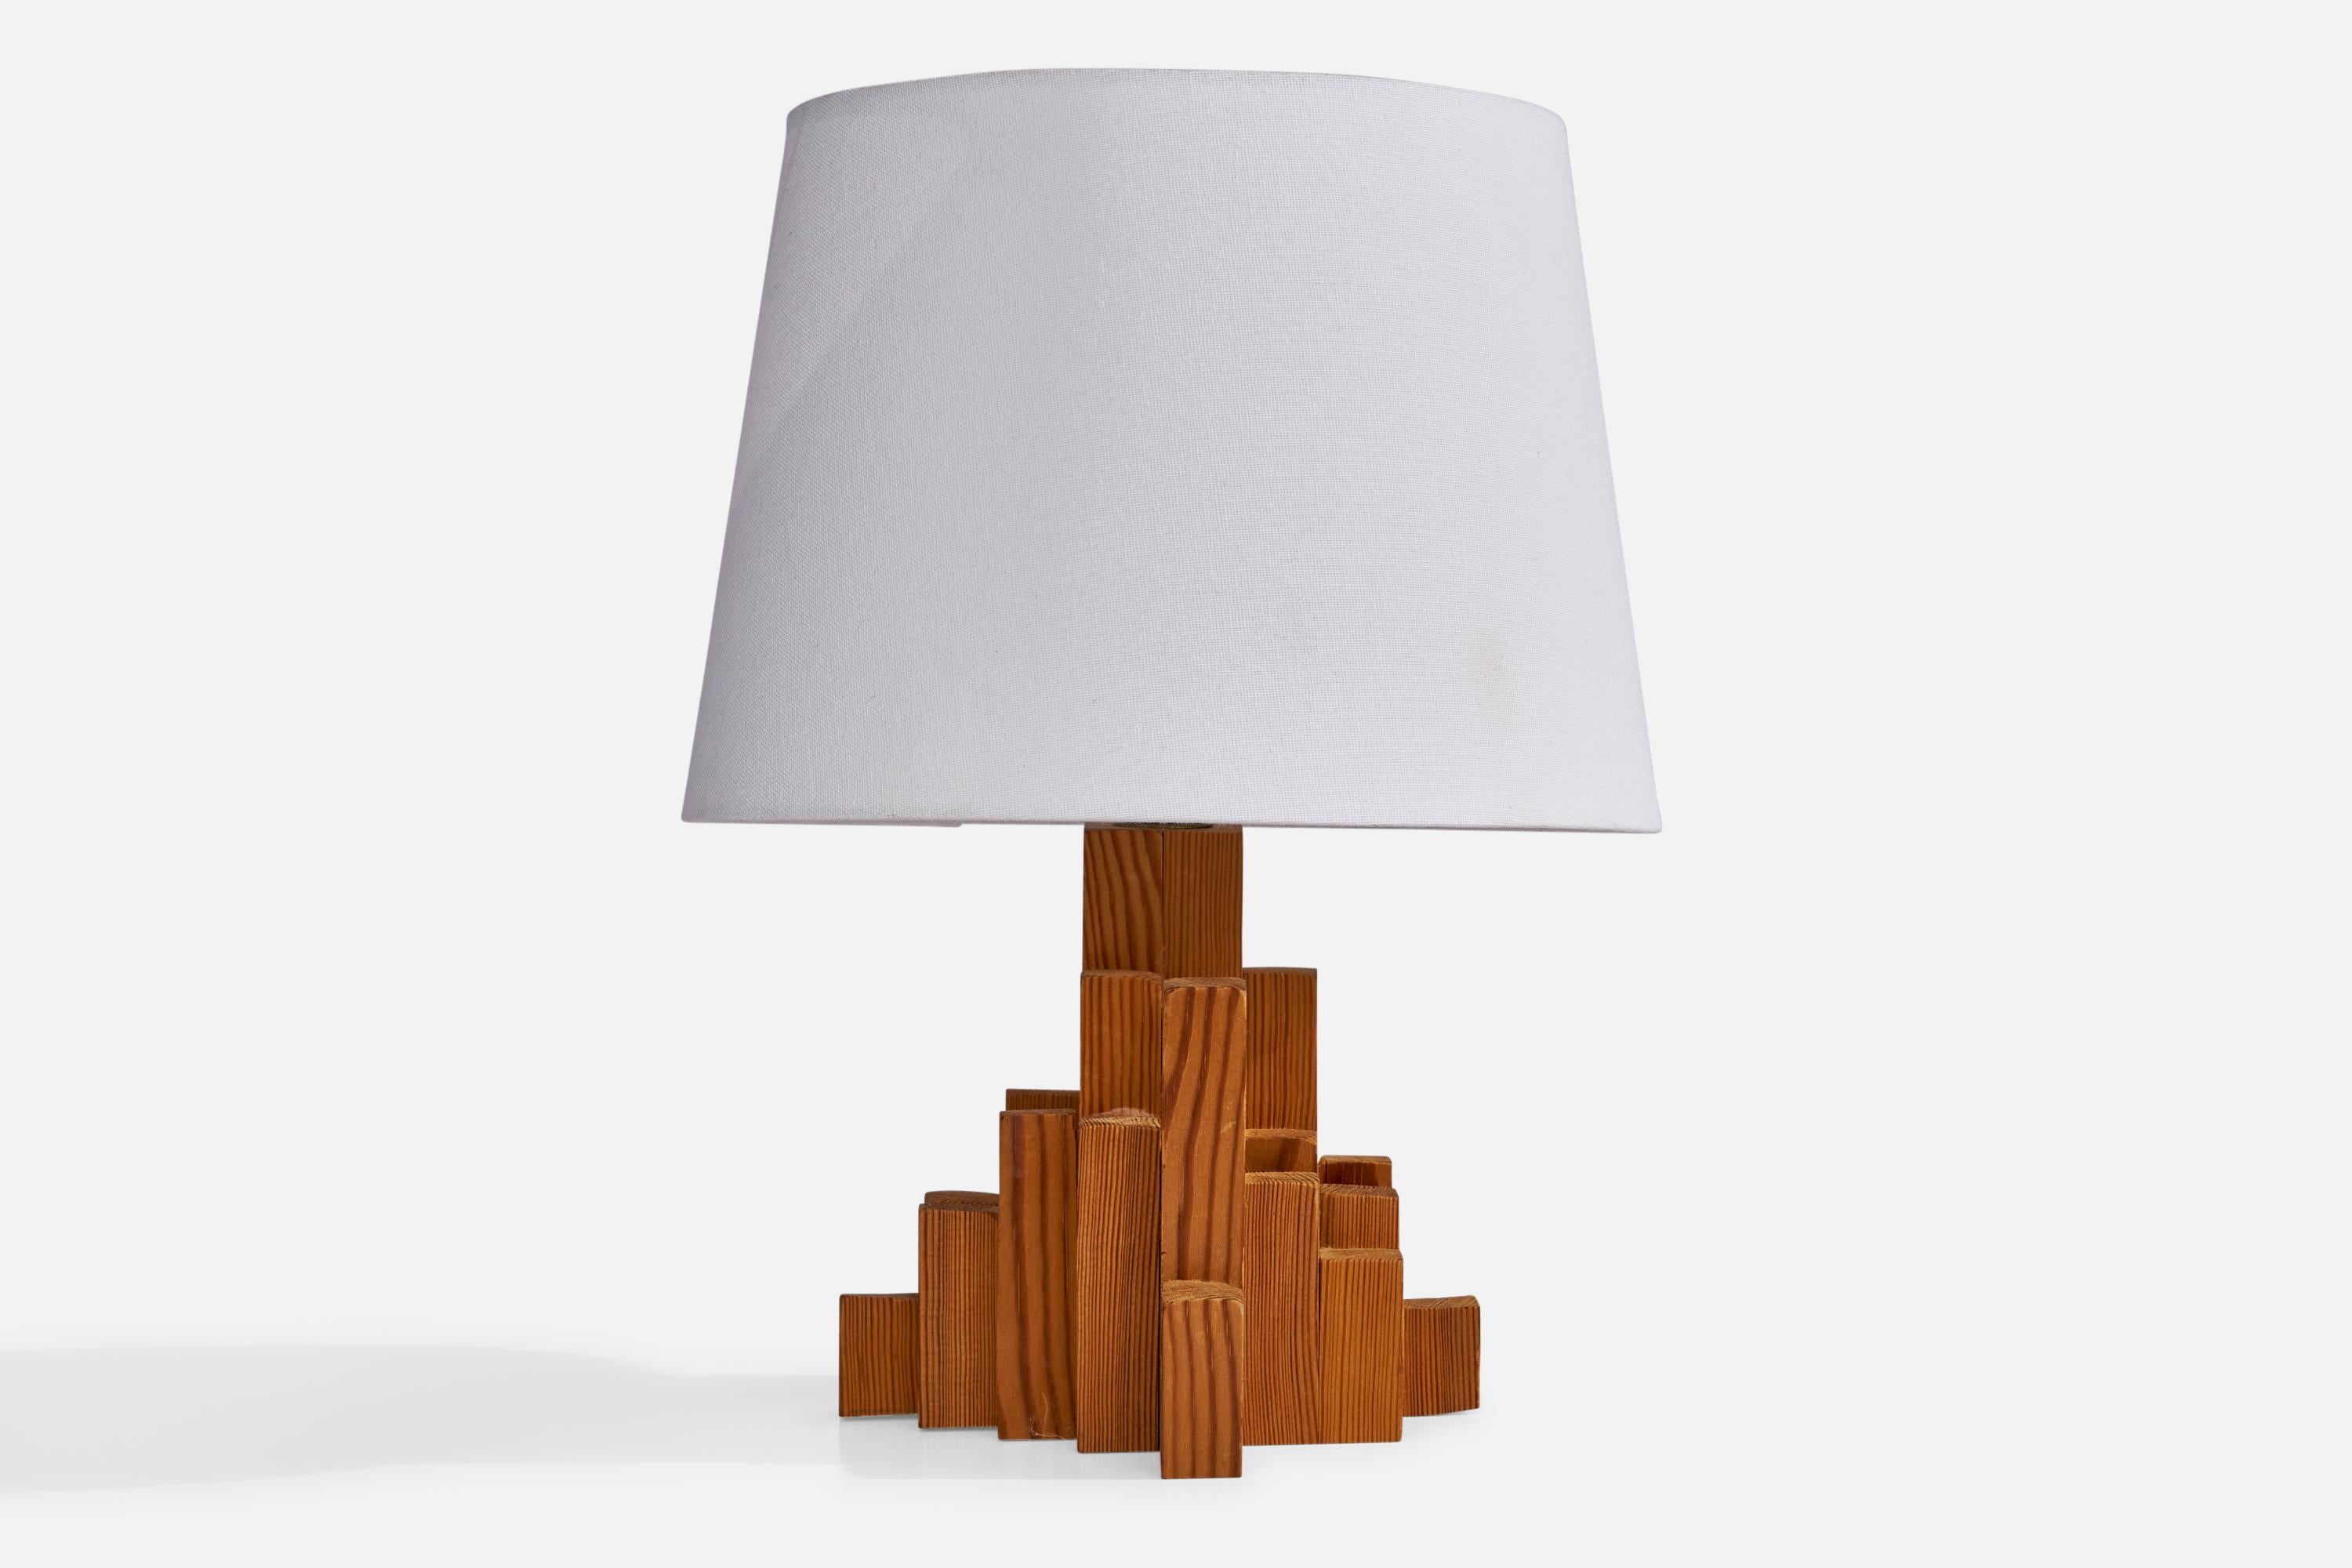 
A freeform pine table lamp designed and produced in Sweden, 1970s.
Dimensions of Lamp (inches): 8.35” H x 6.65” W x 6.9” Depth
Dimensions of Shade (inches): 8” Top Diameter x 10” Bottom Diameter x 7.25” H
Dimensions of Lamp with Shade (inches):